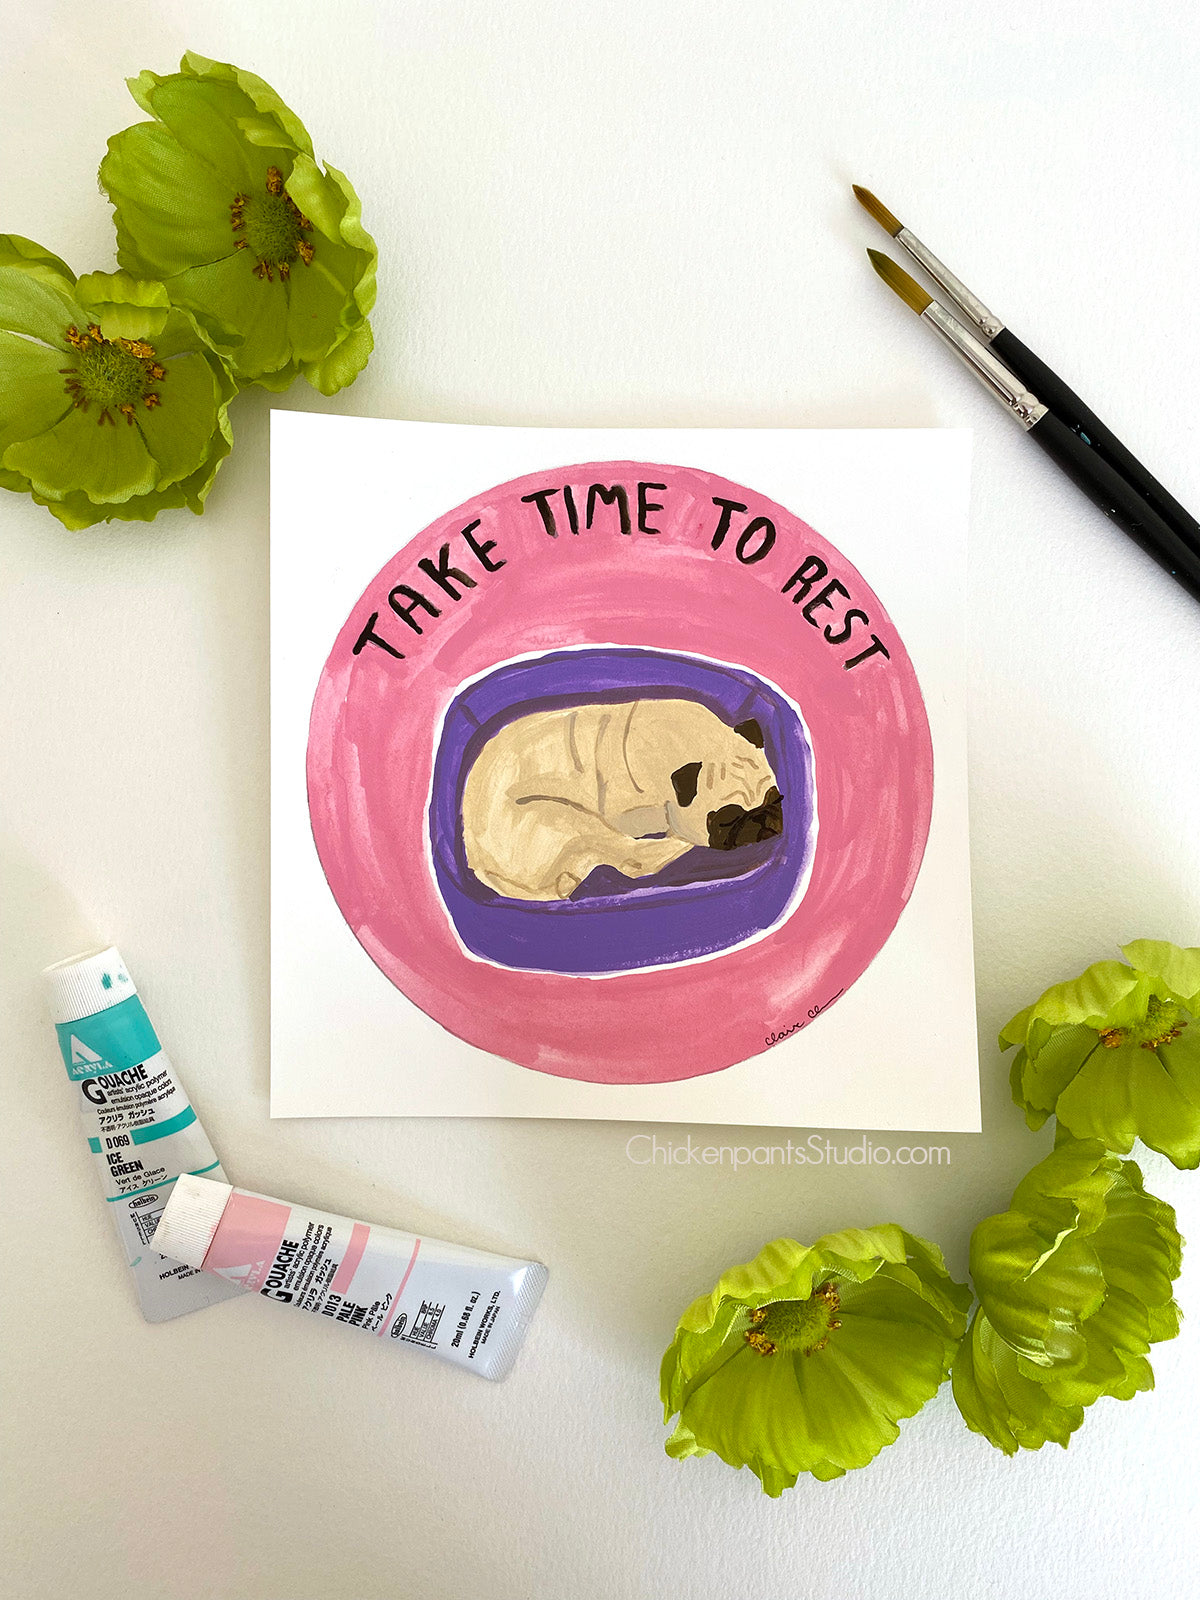 Take Time To Rest - Original Pug Painting